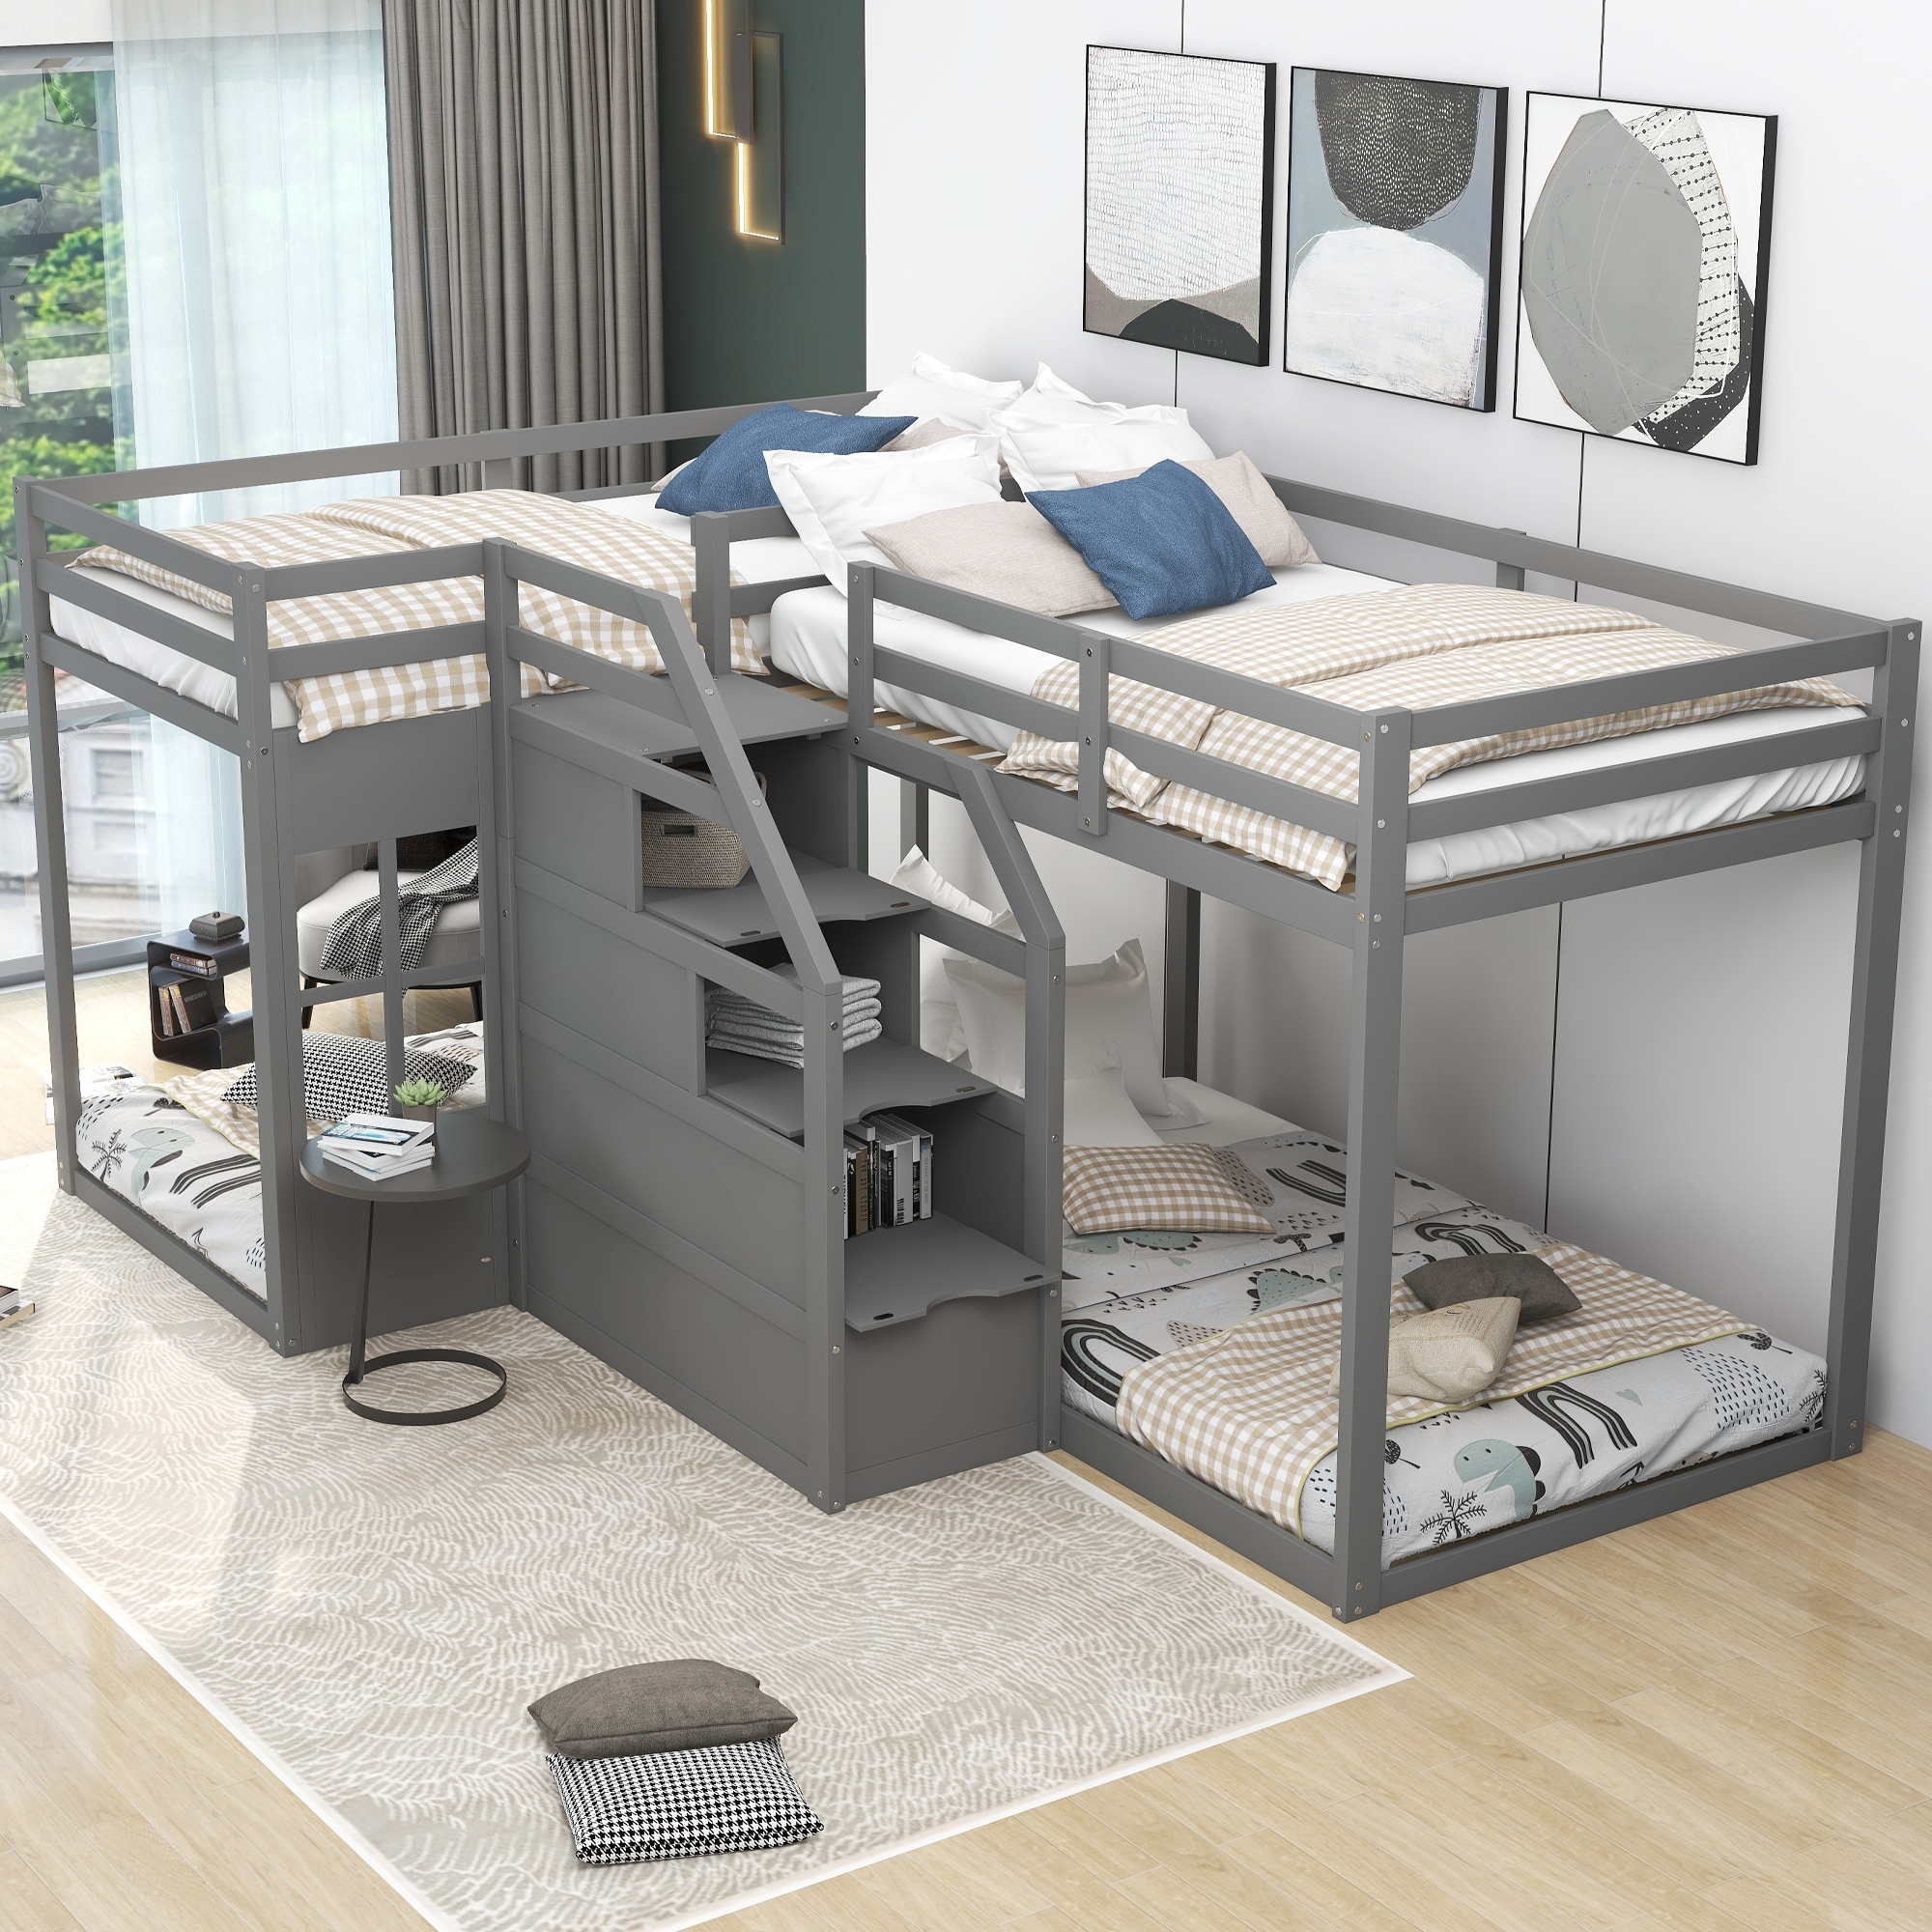 Twin XL Over King L-Shaped Bunk Bed (Charcoal)